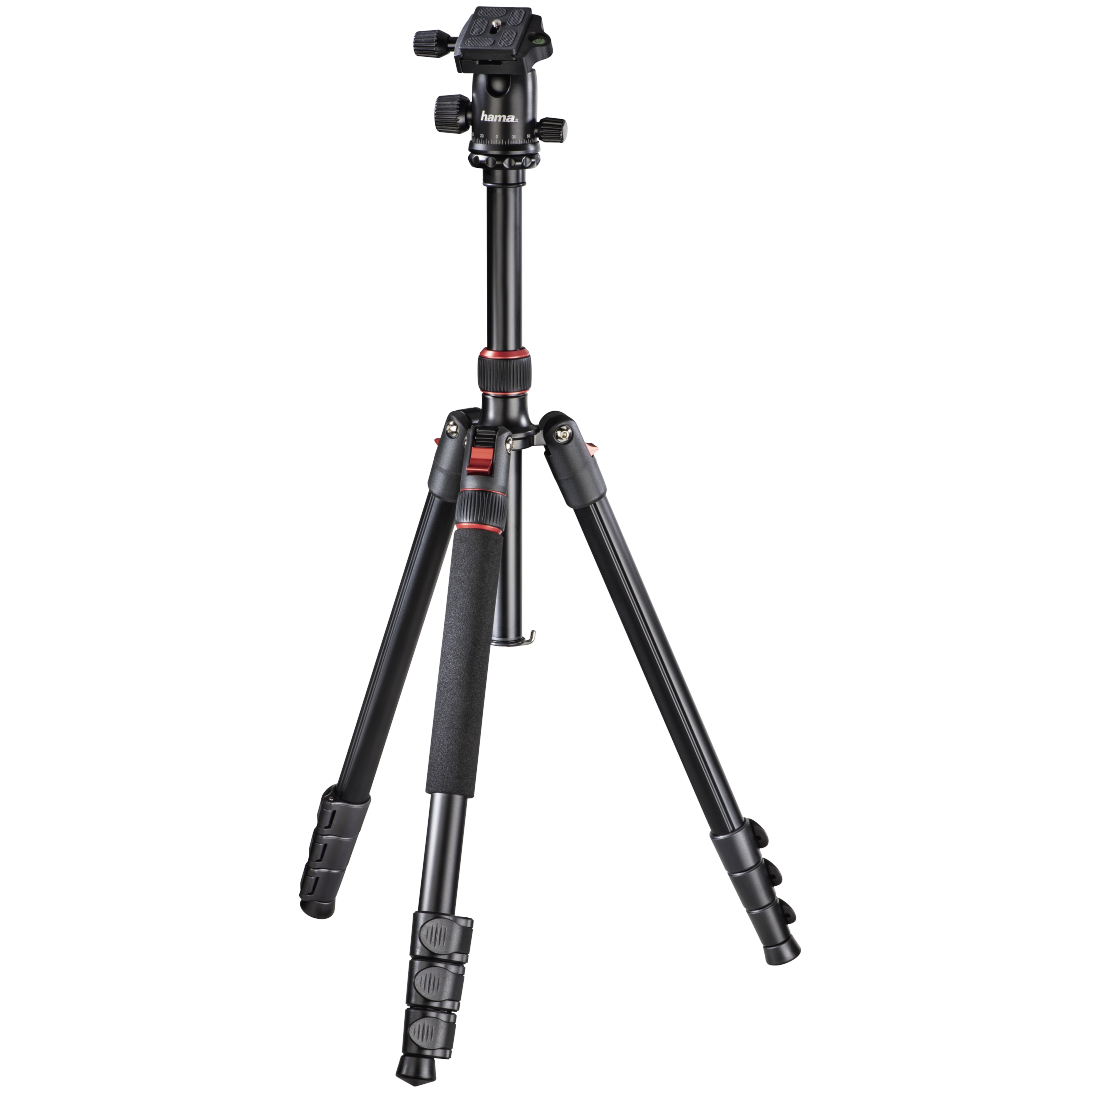 Tripods for Photographic Cameras, Smartphones & GoPro